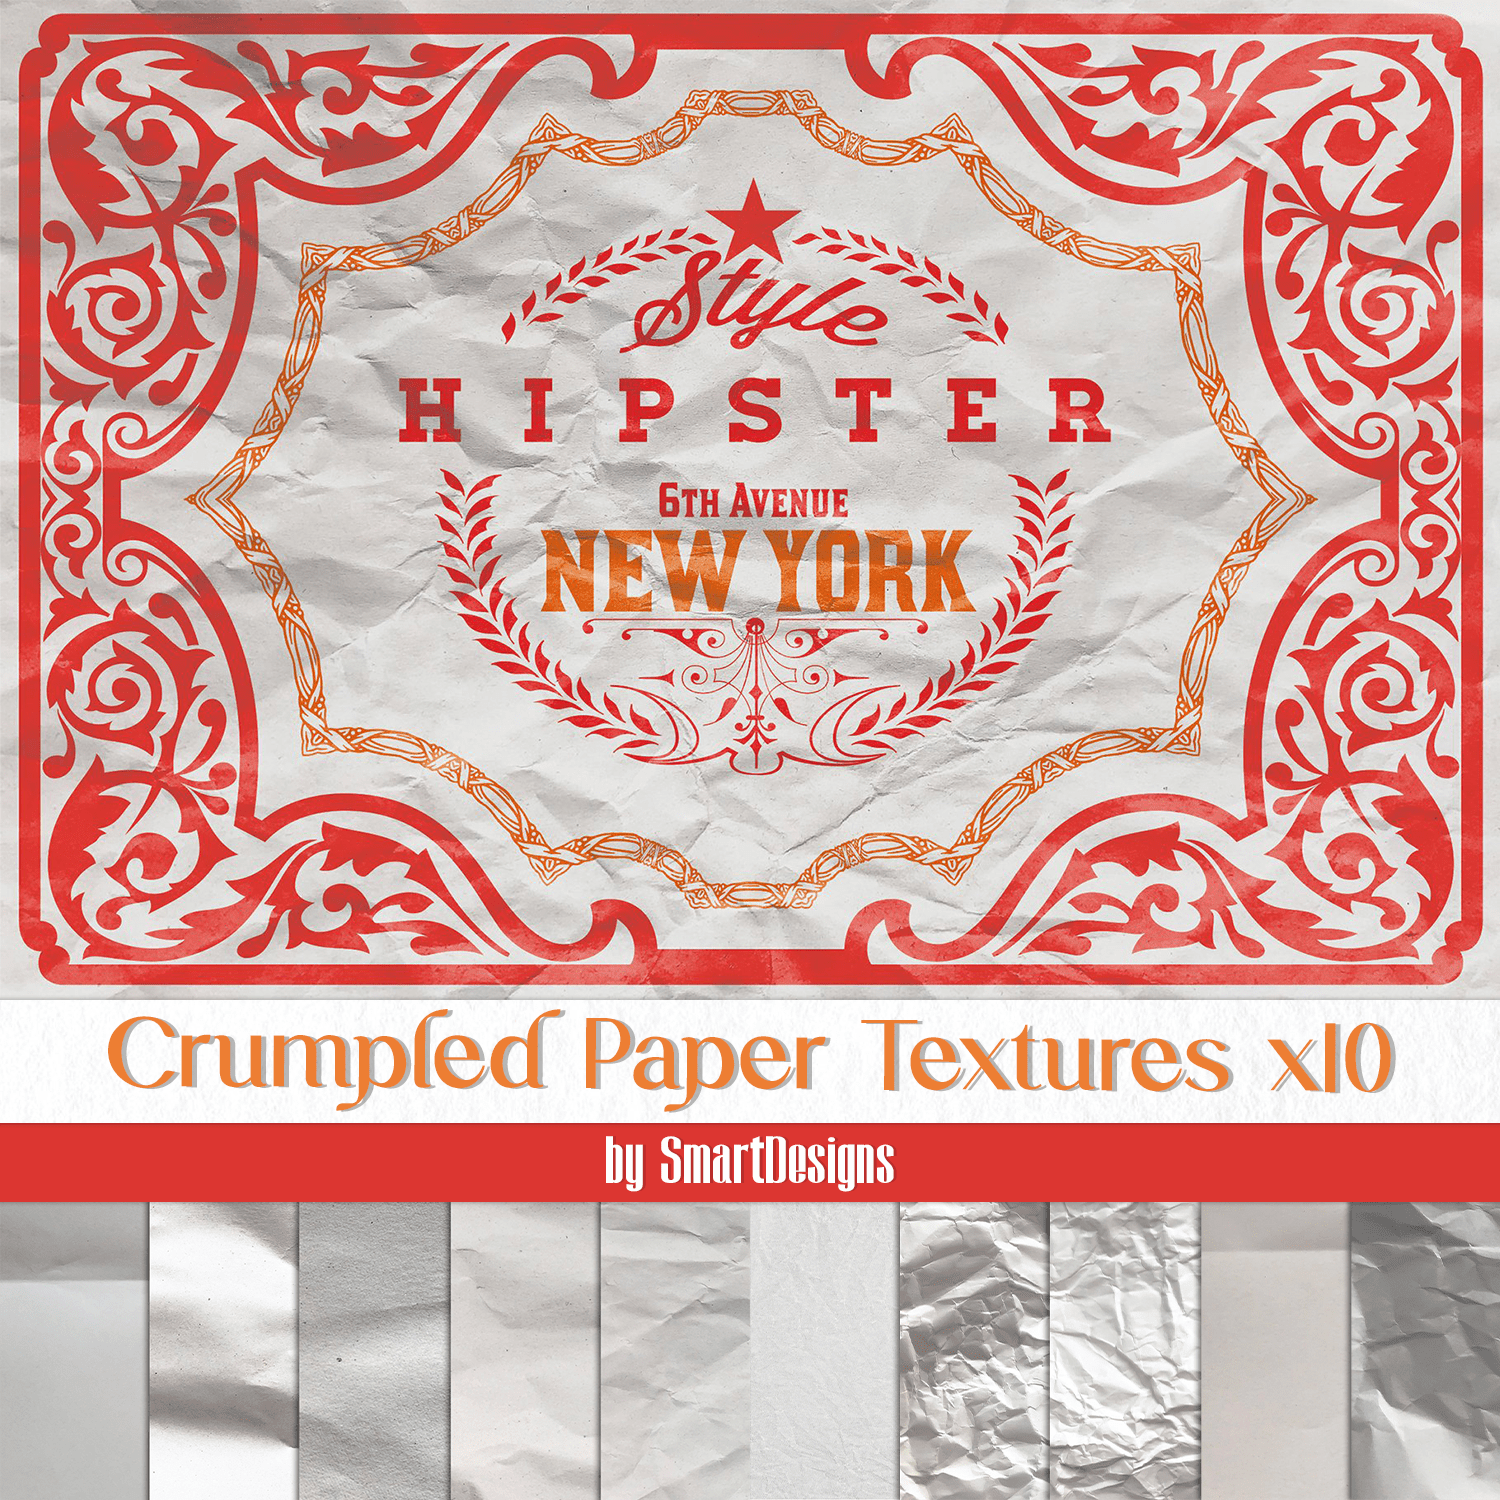 Preview crumpled paper textures.